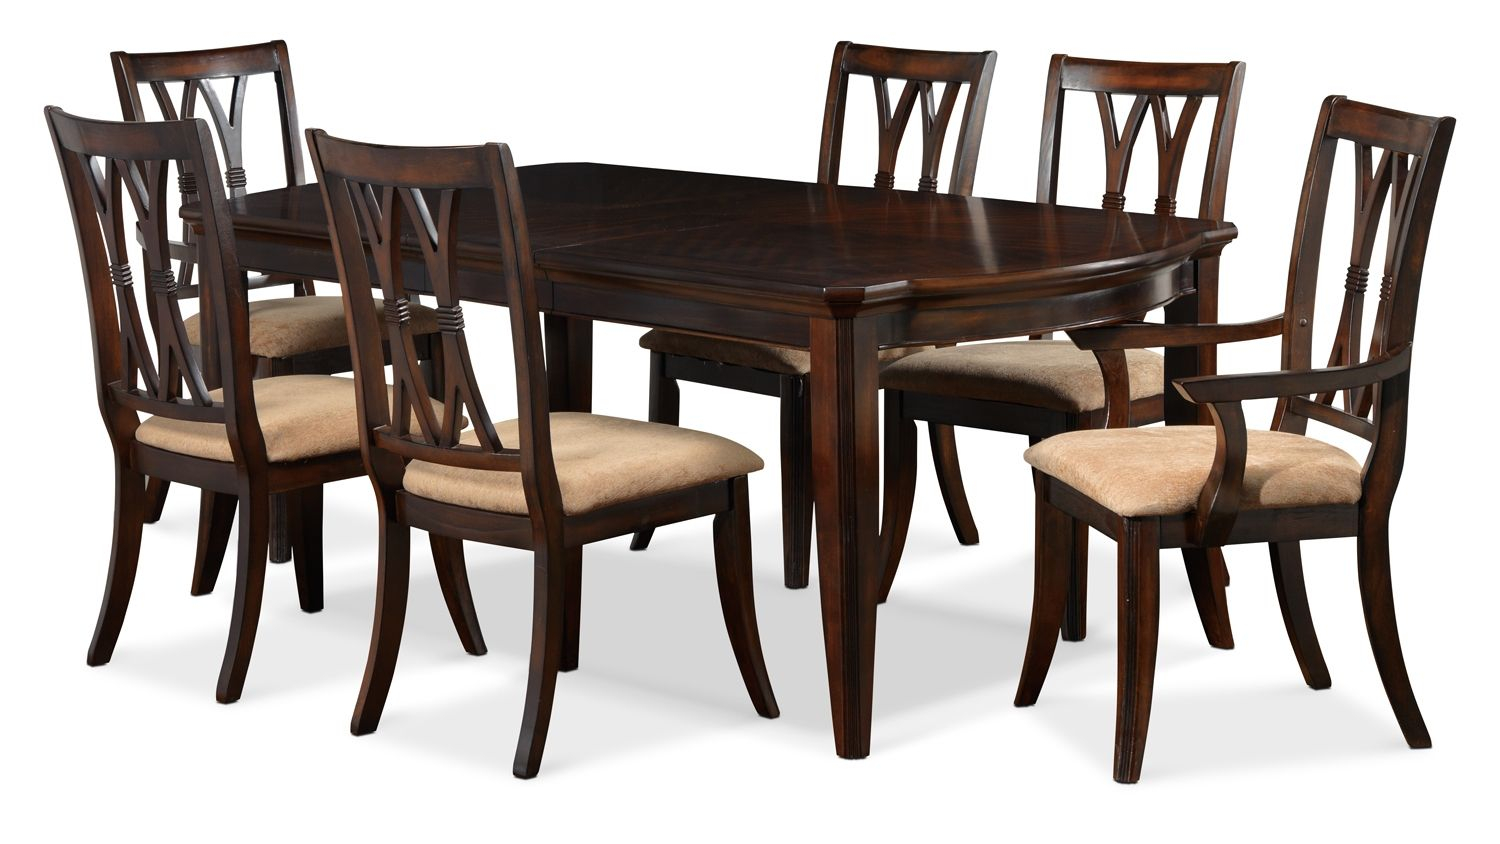 King George Dining Room 7 Pc Dining Set Leons Dining intended for dimensions 1500 X 844